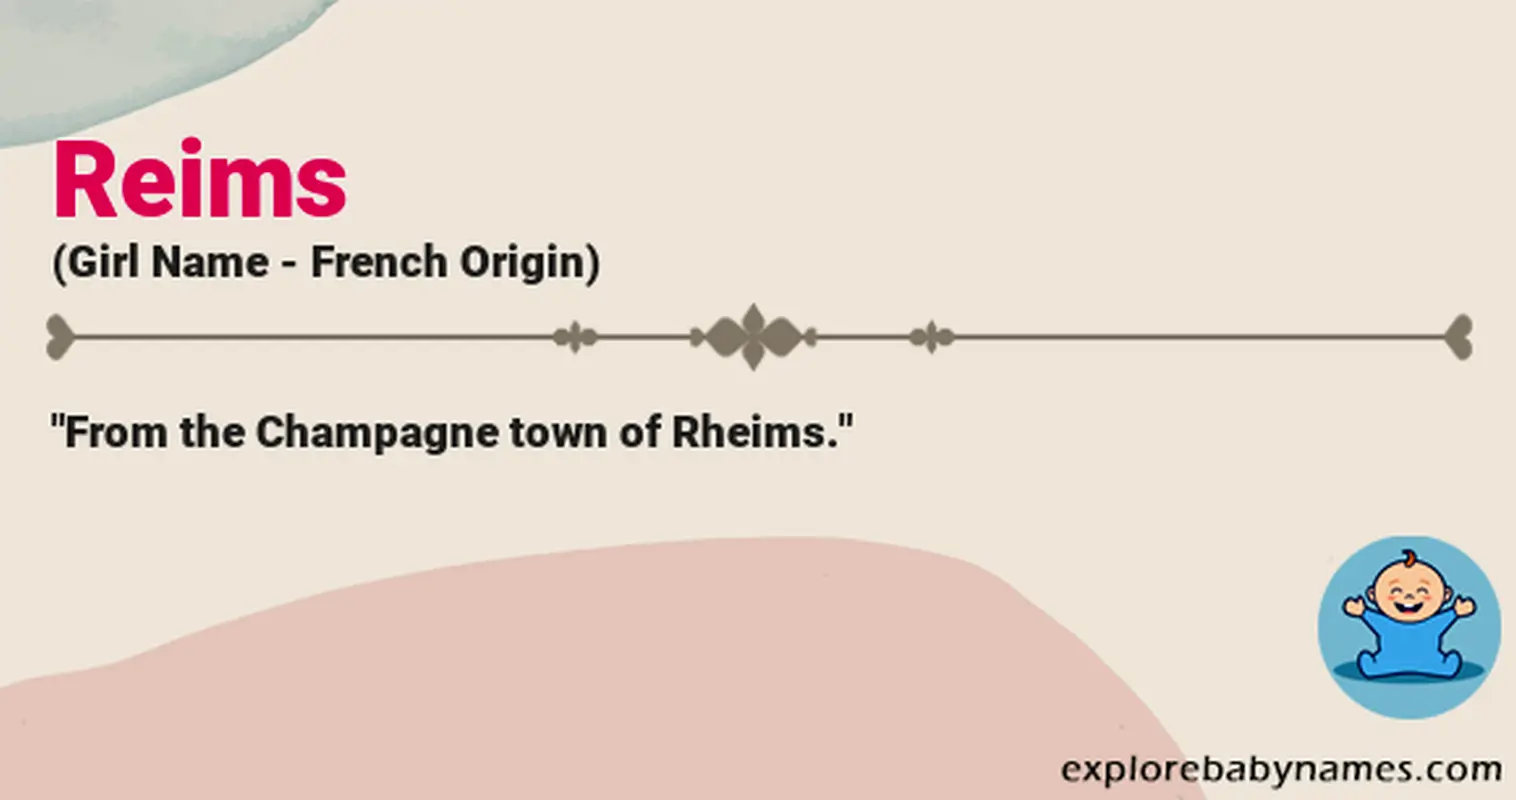 Meaning of Reims